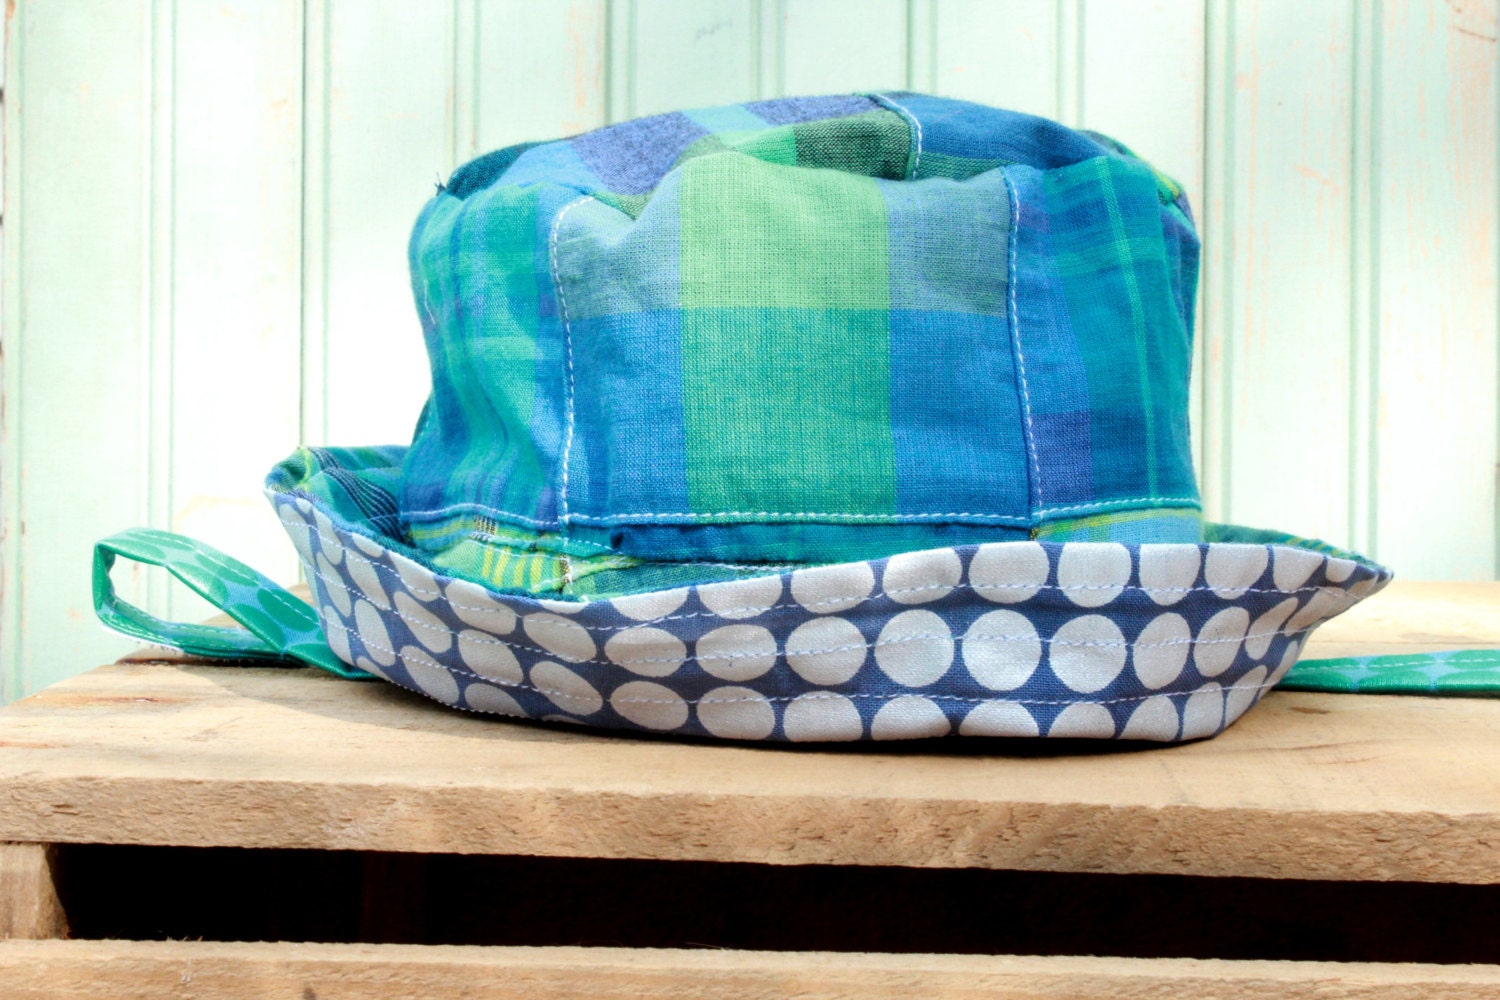 Baby Sun Hat Turquoise Madras Bucket Cap Newborn to 6 Months - Reversible Trick Sun Hat Country Style - worthygoods